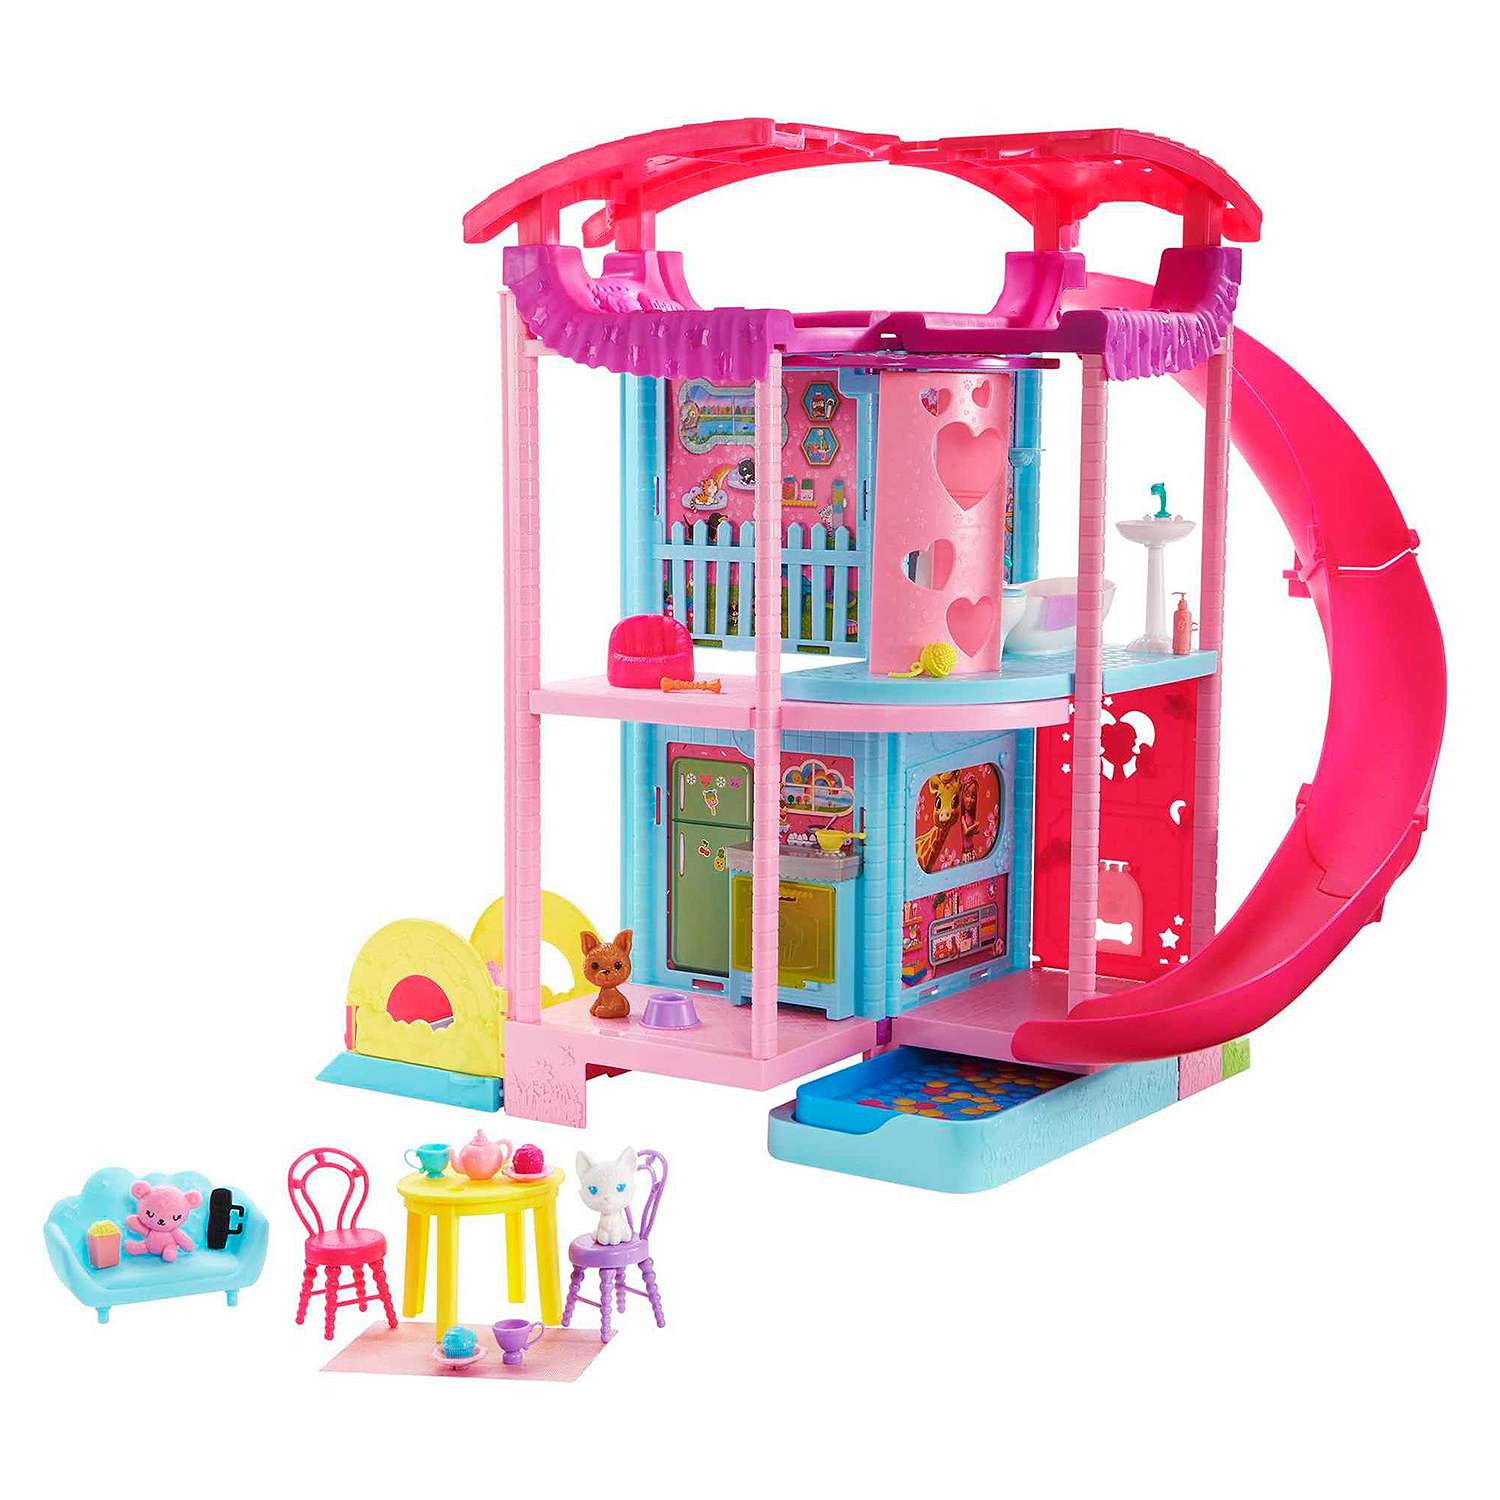 Barbie Doll Sets:Chelsea Playhouse Dollhouse w/ Pets & Accessories $27.49, Barbie Fab Friends Styling Head $9.99 & More + Free Shipping on $25+